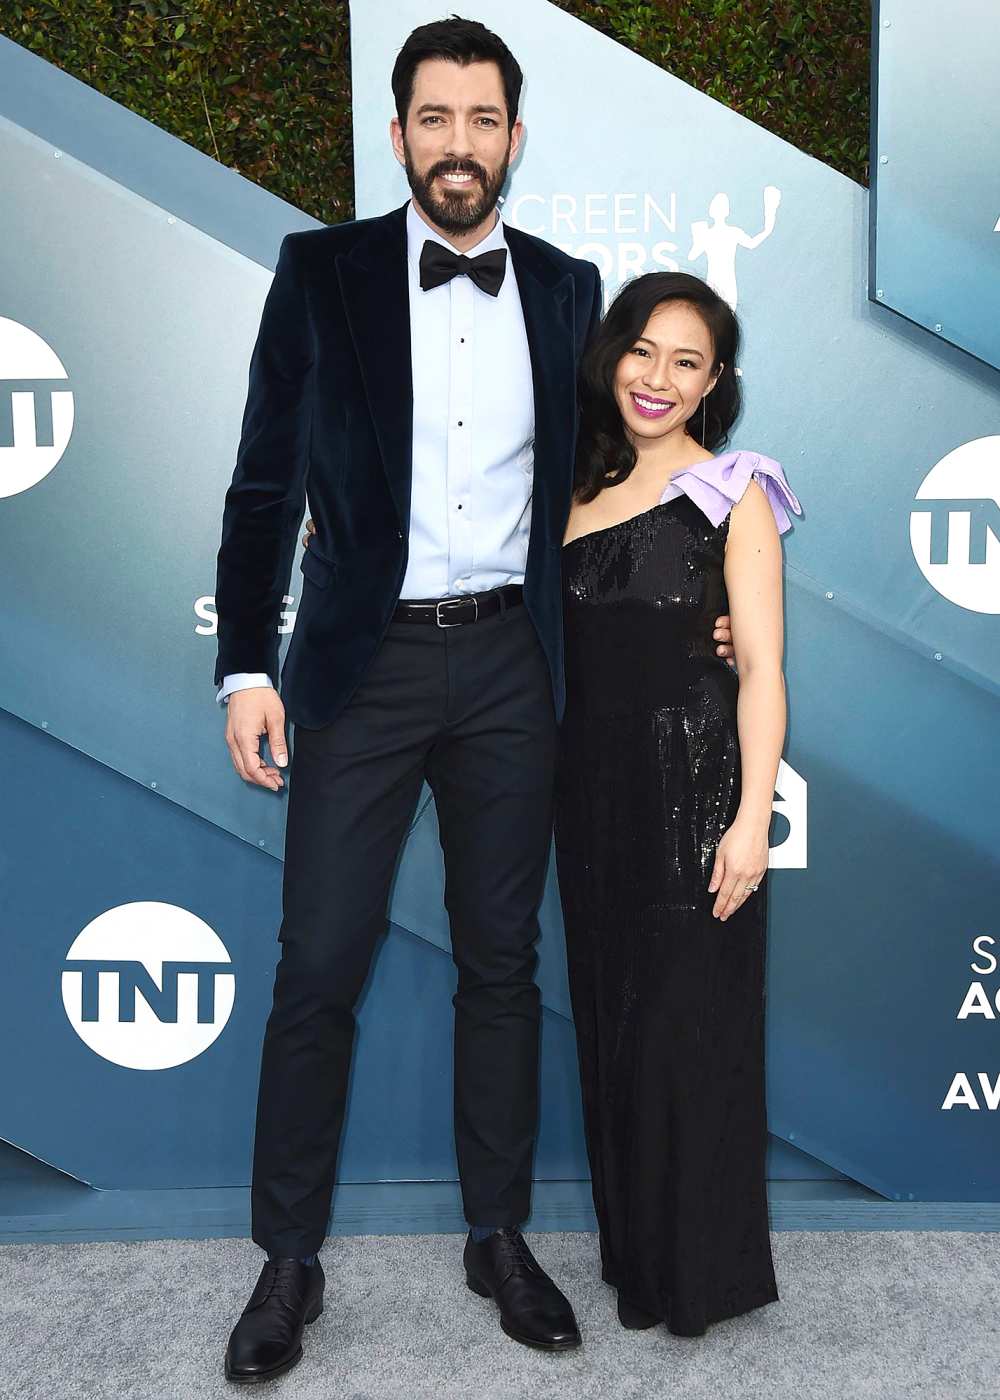 Drew-Scott-and-Linda-Phan-Get-a-Lot-of-Parenting-Practice-From-Nieces-and-Nephews